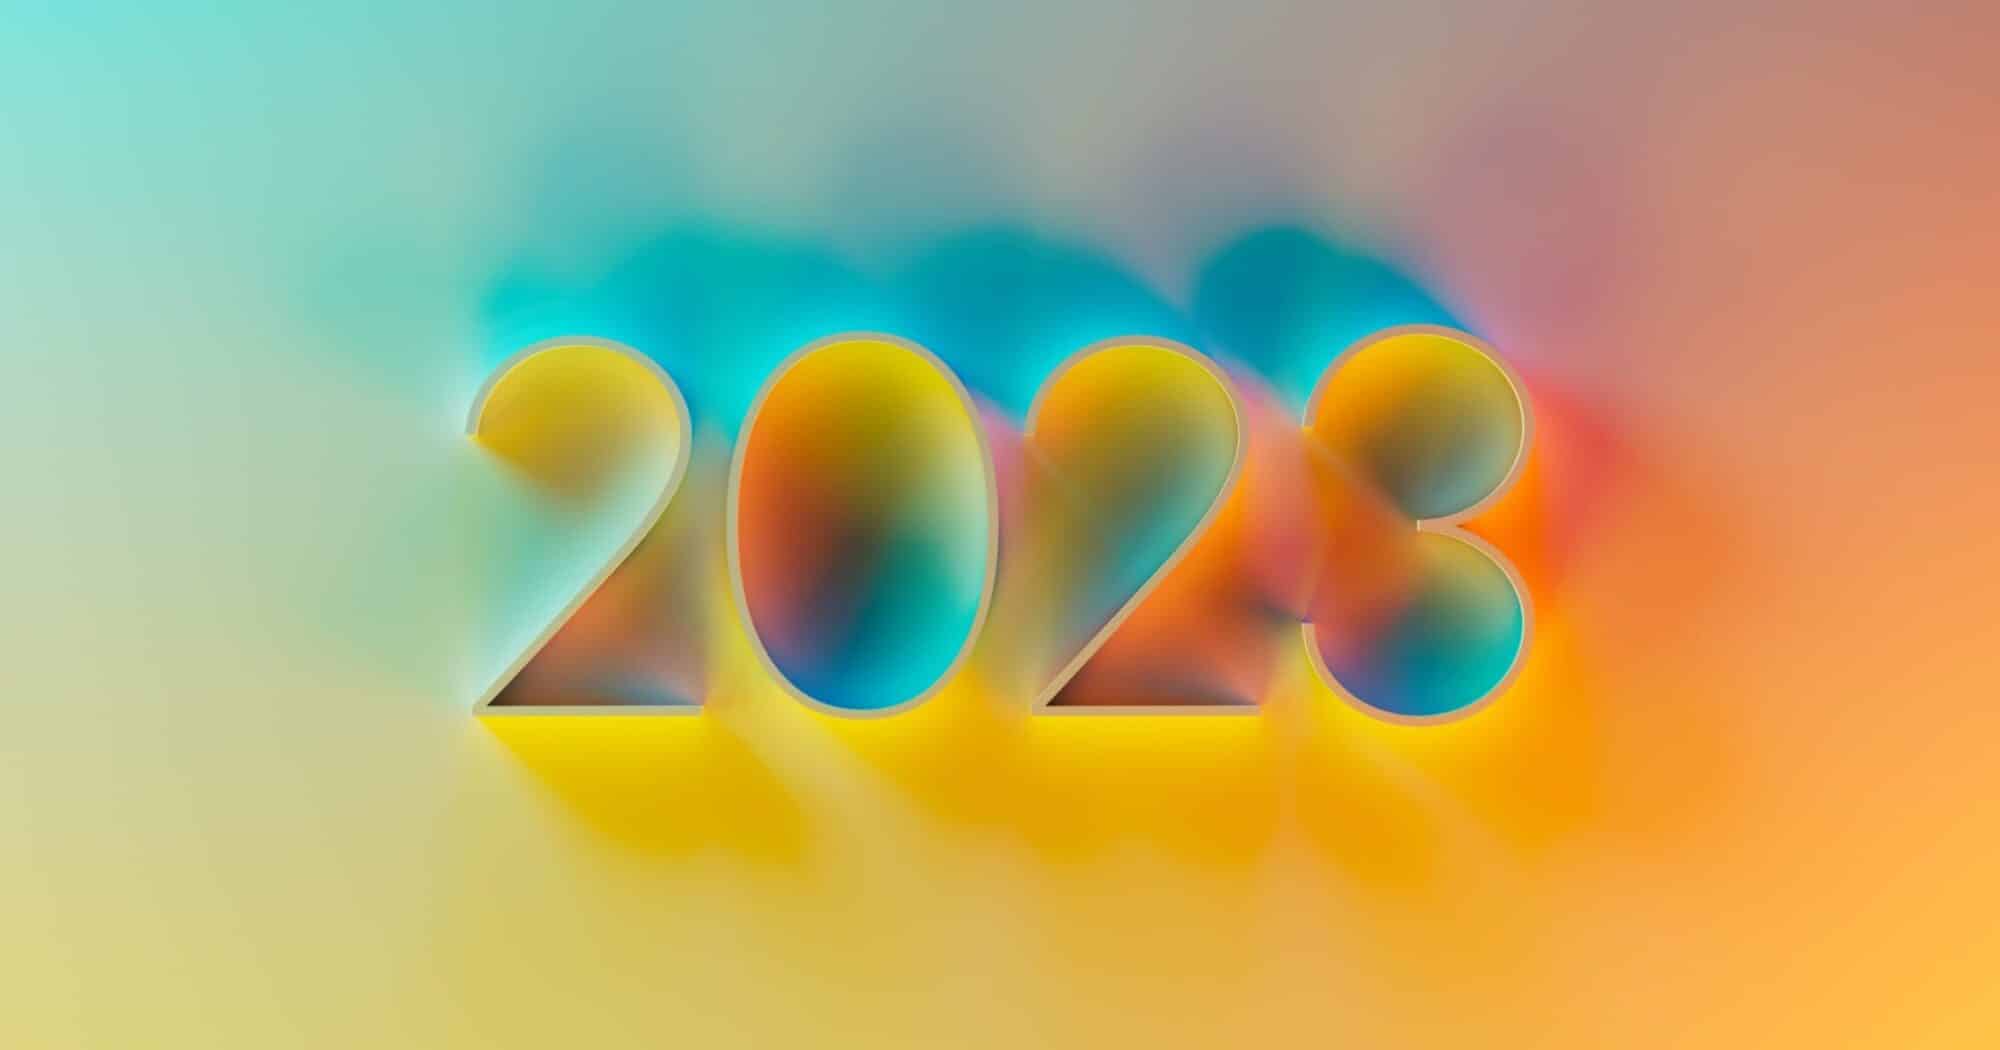 The number "2023" on a gradient background.